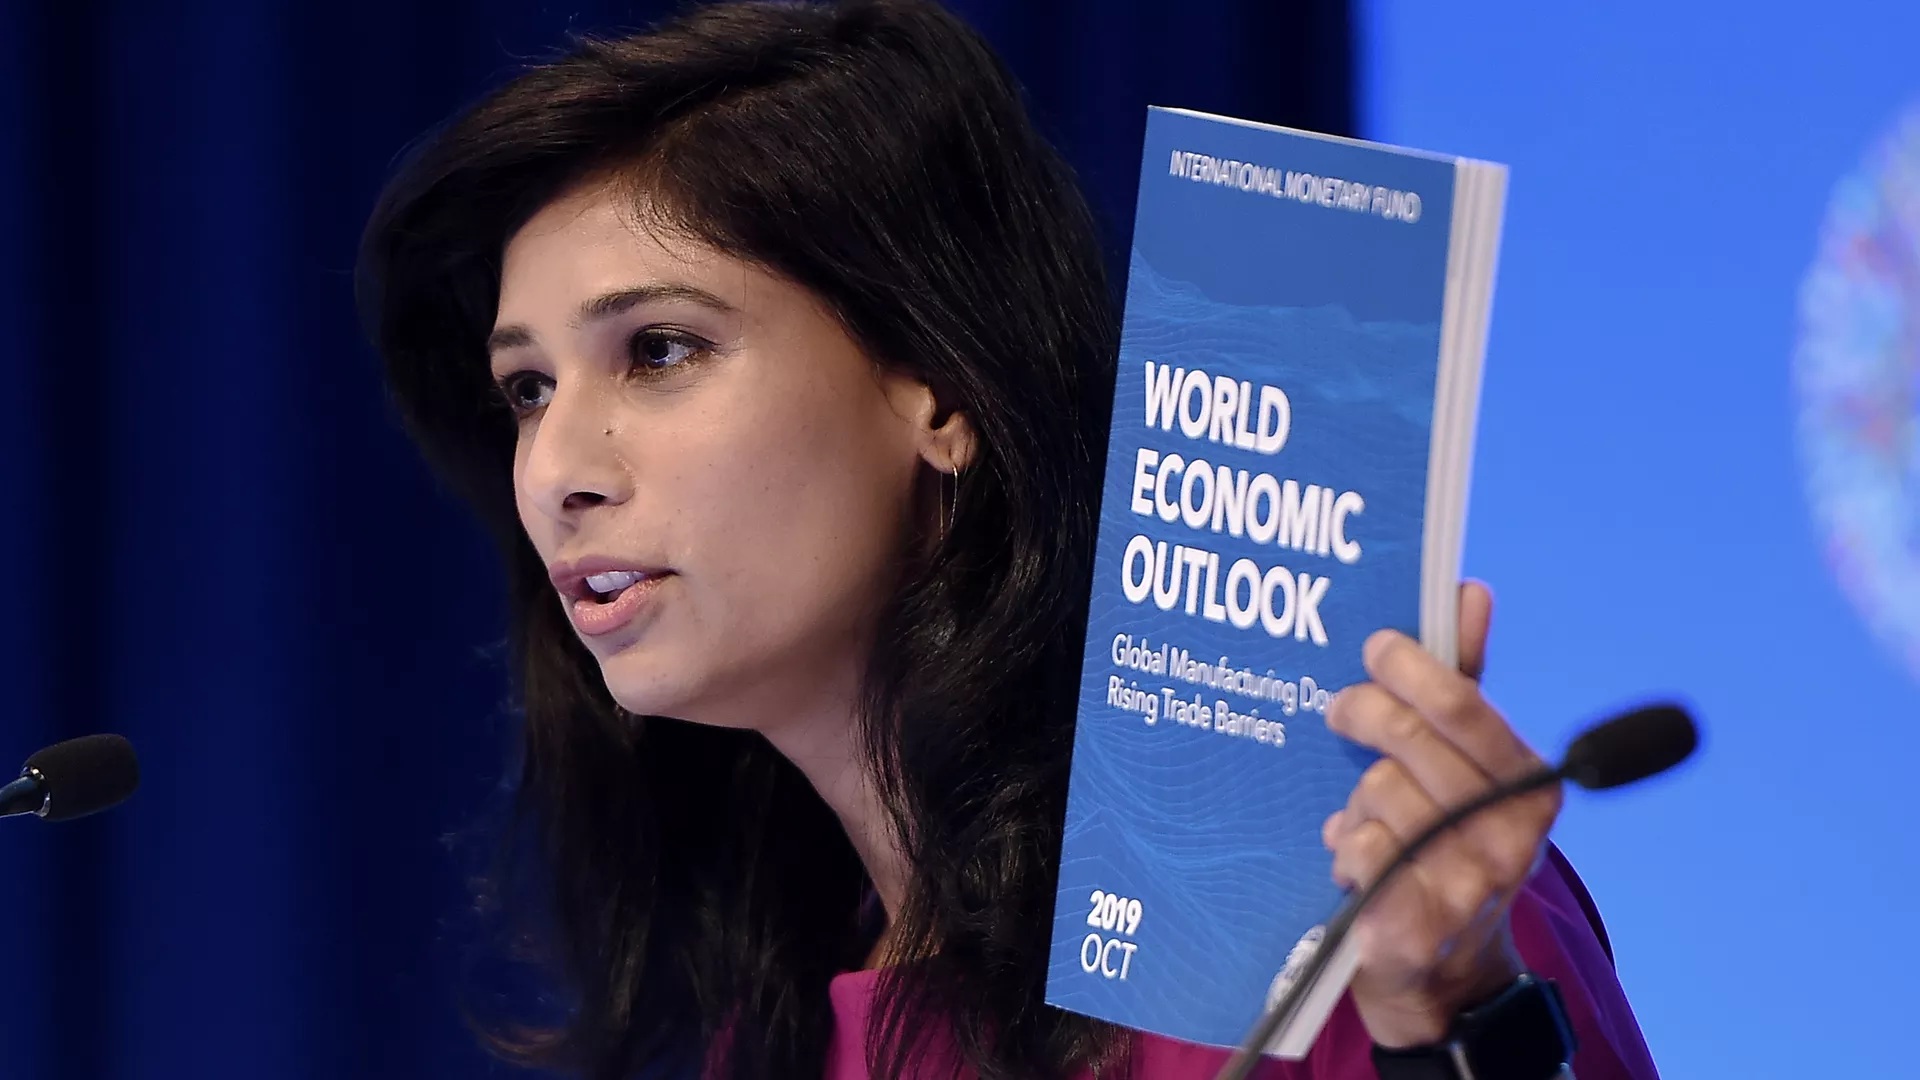 Gita Gopinath chief economist and director of the Research Department at the International Monetary Fund